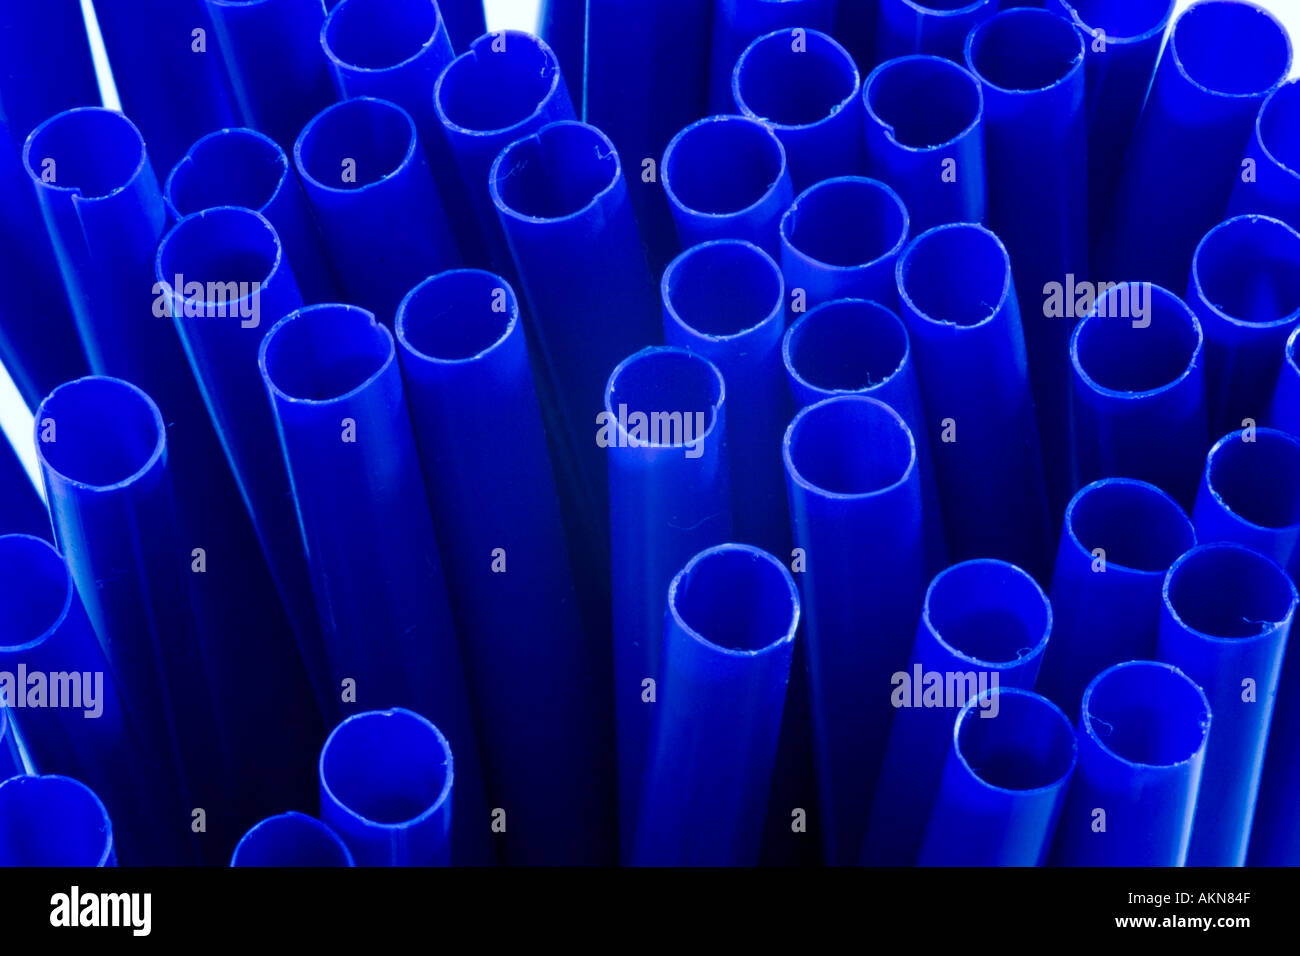 Abstract image of a bundle of drinking straws Stock Photo